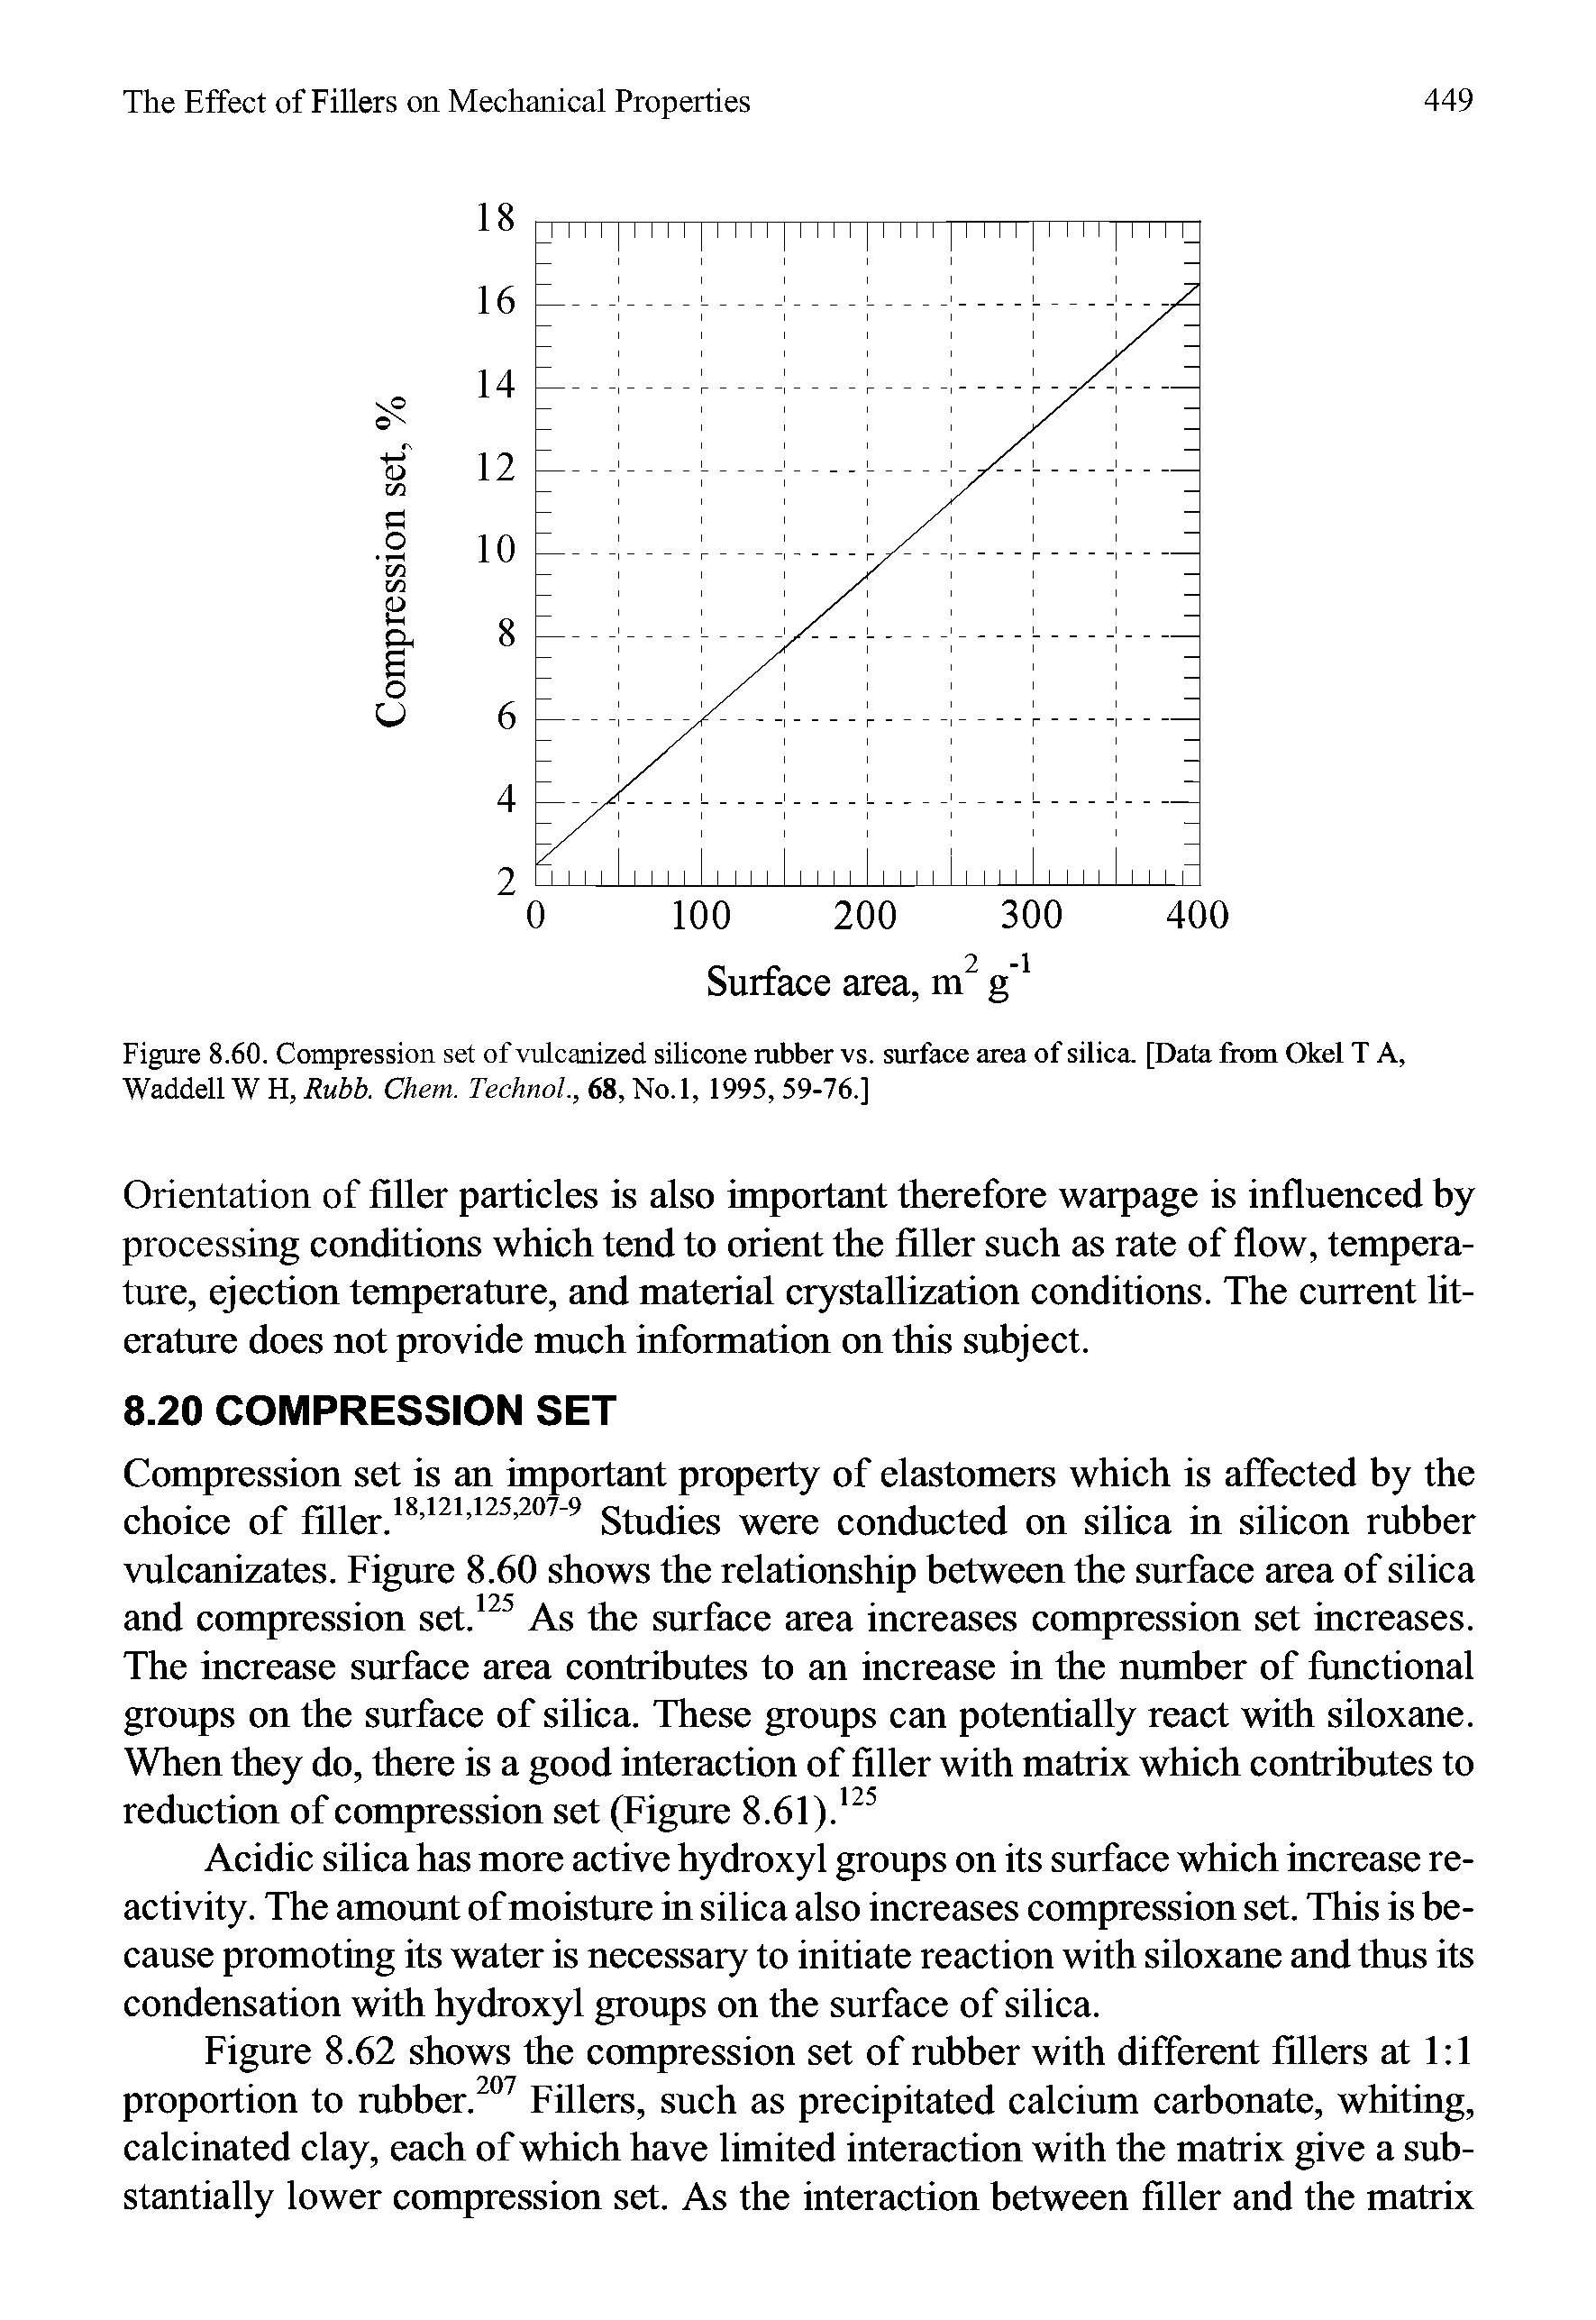 Figure 8.60. Compression set of vulcanized silicone rubber vs. surface area of silica. [Data from Okel T A, Waddell W H, Rubb. Chem. Technol., 68, No. 1, 1995, 59-76.]...